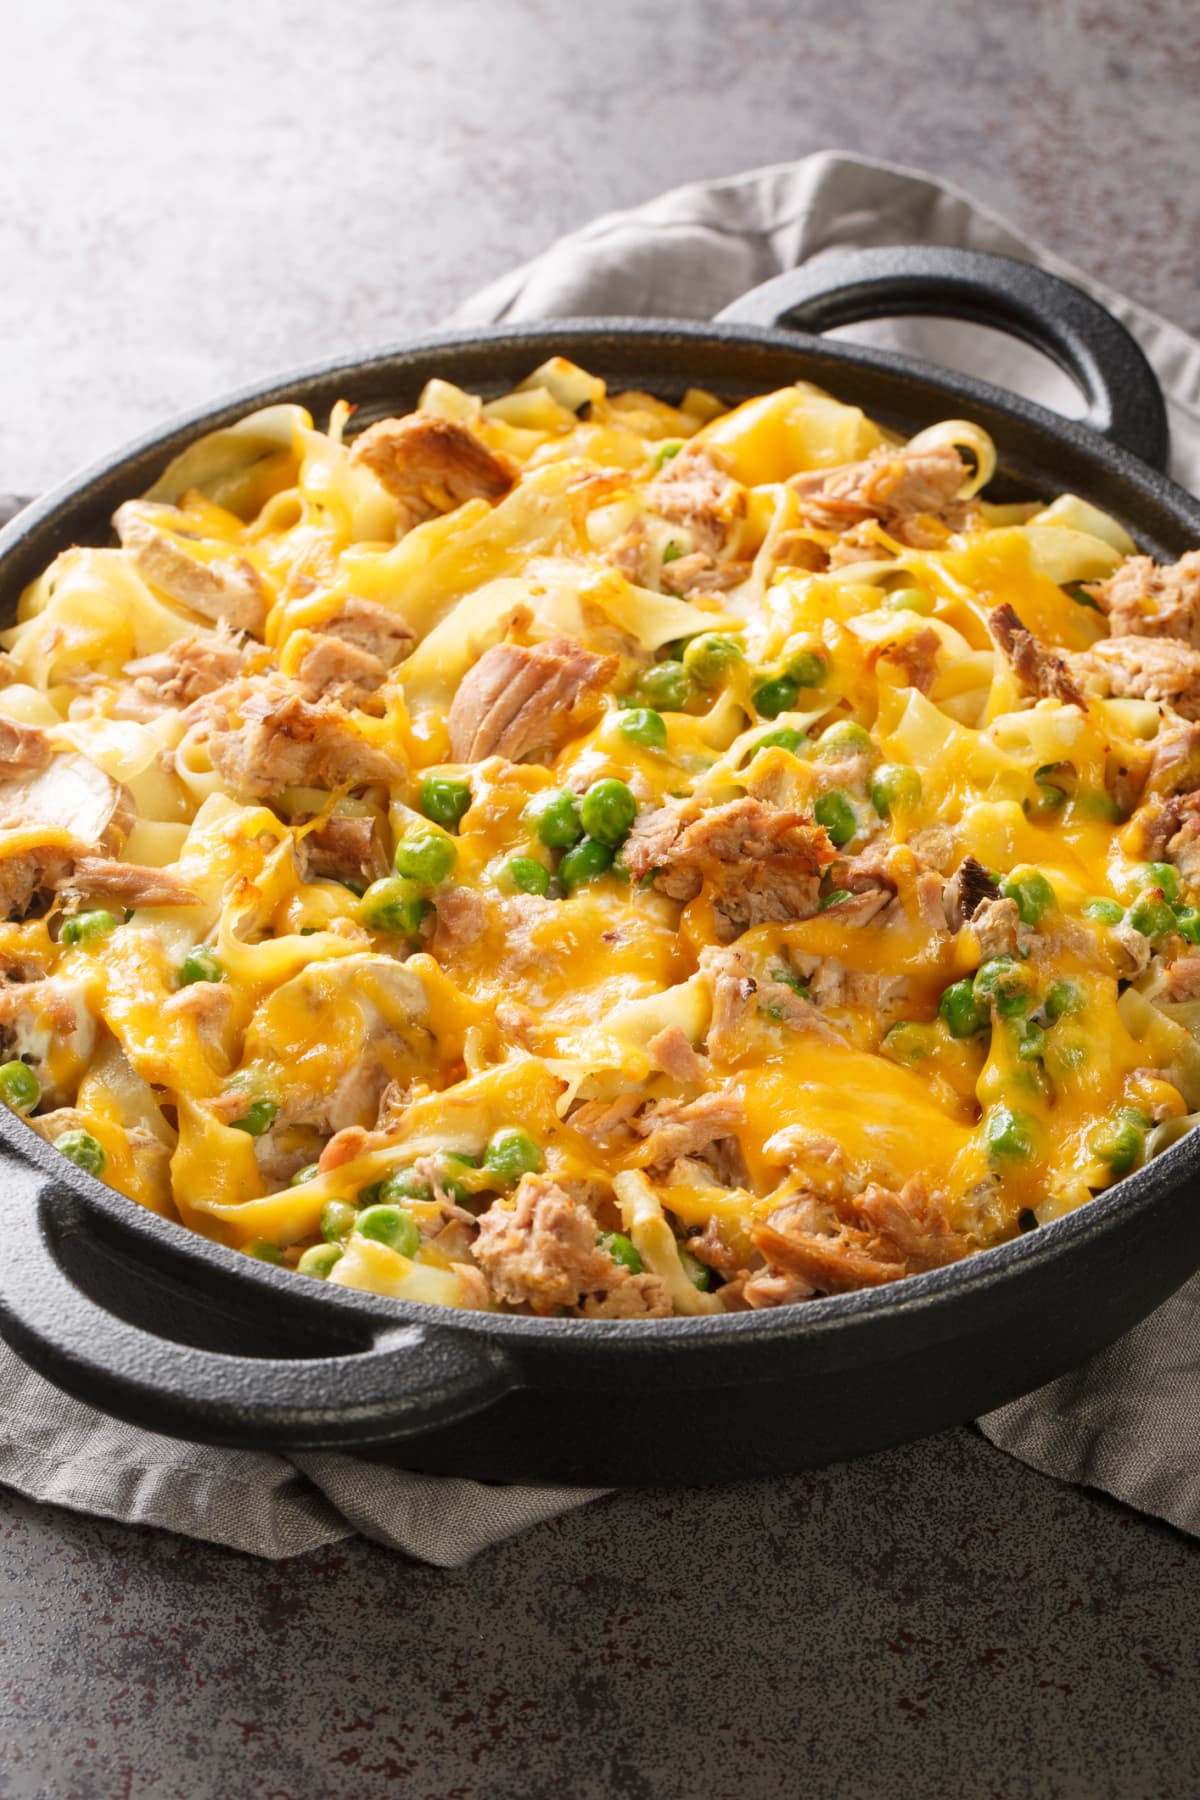 Casserole with noodles, meat, peas, and cheese in cast iron pan